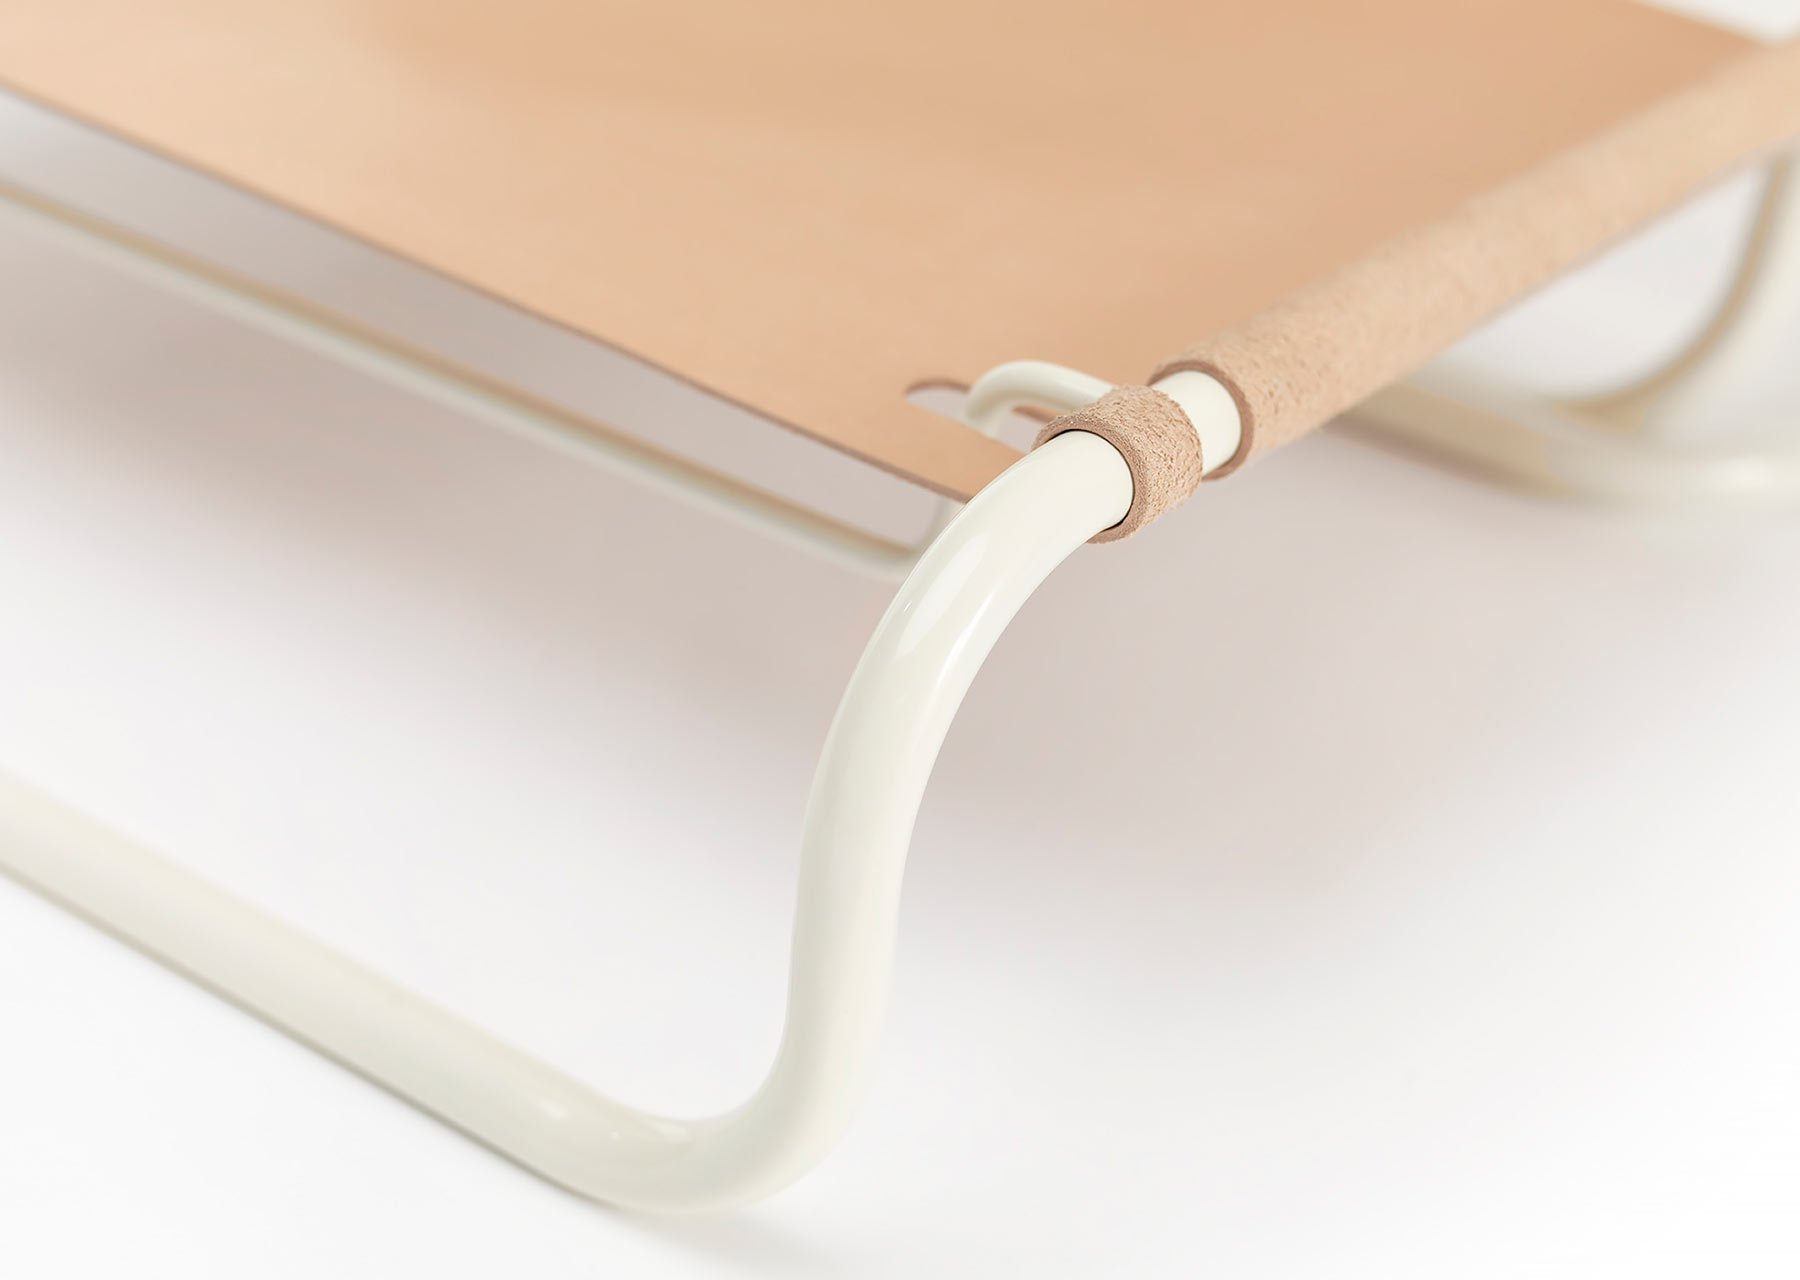 Compact Folding Chair By Glen Baghurst 7 